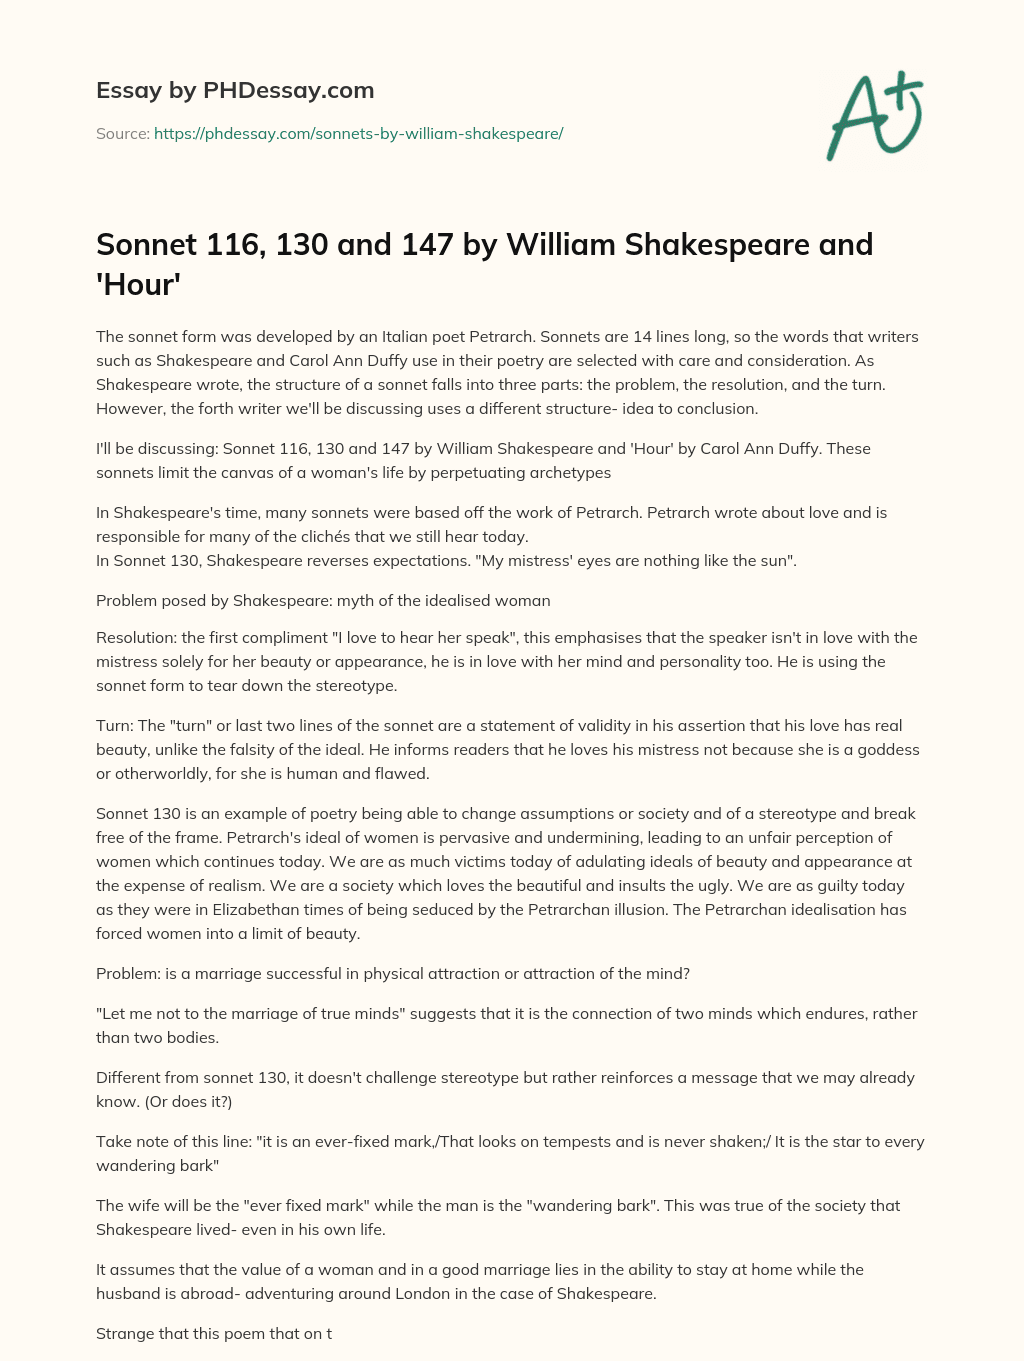 Sonnet 116, 130 and 147 by William Shakespeare and ‘Hour’ essay